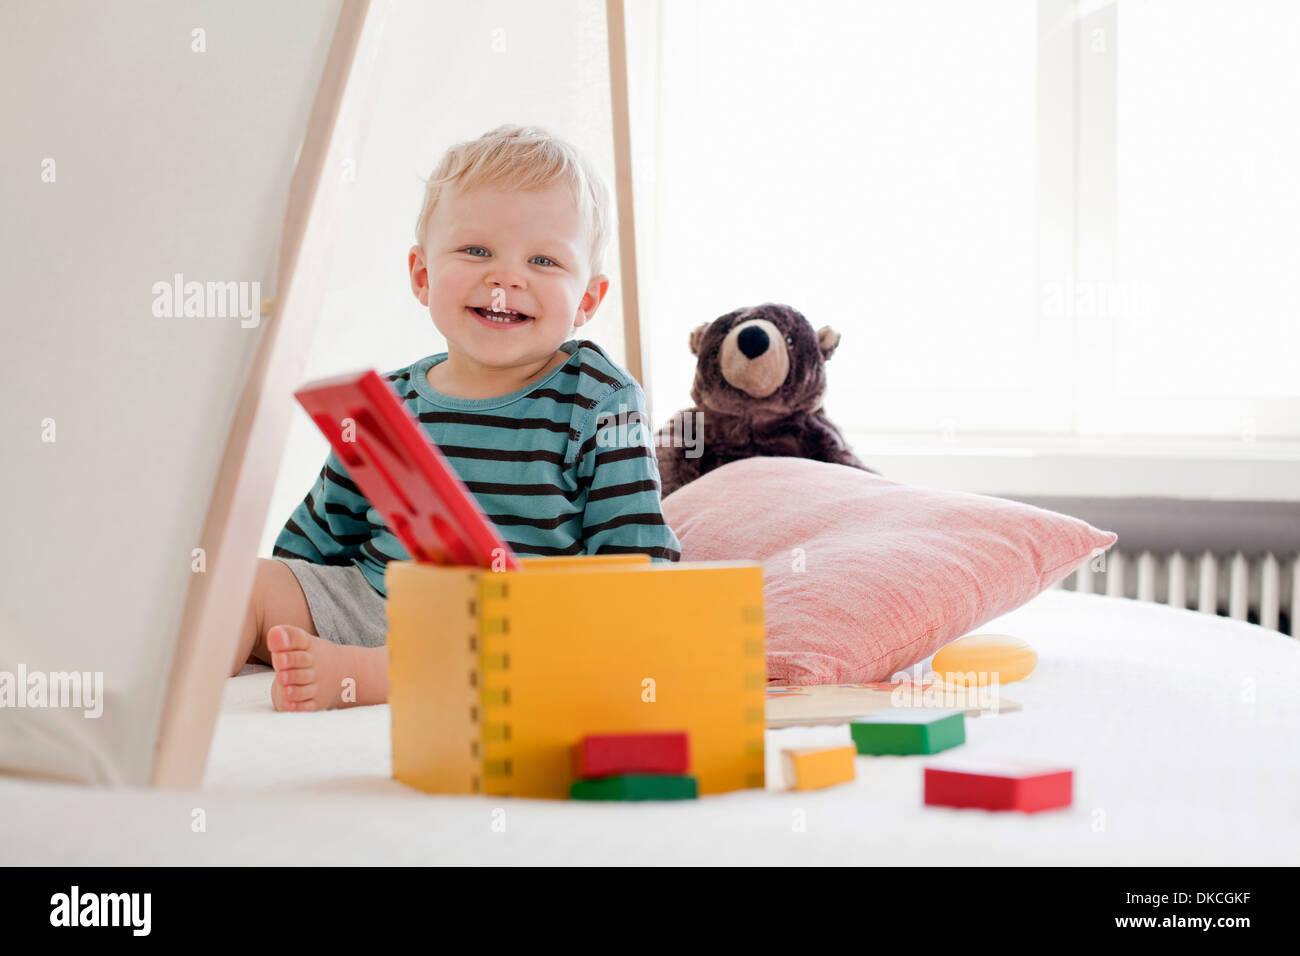 Happy little boy with toys Stock Photo